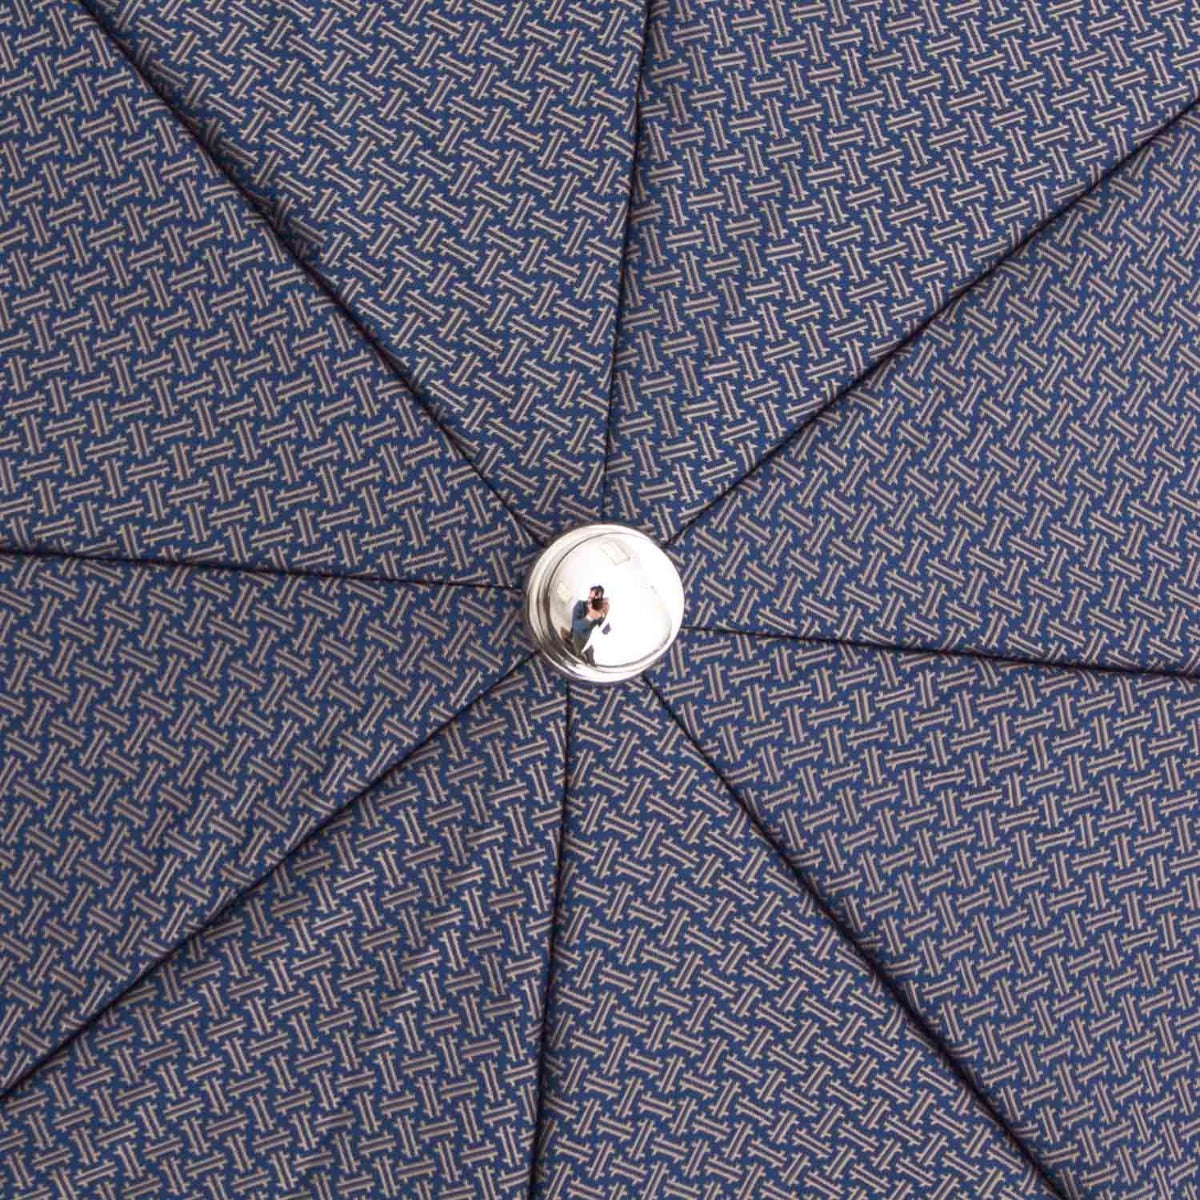 A close up of a Patterned Navy Travel Umbrella with Leather Handle from KirbyAllison.com.